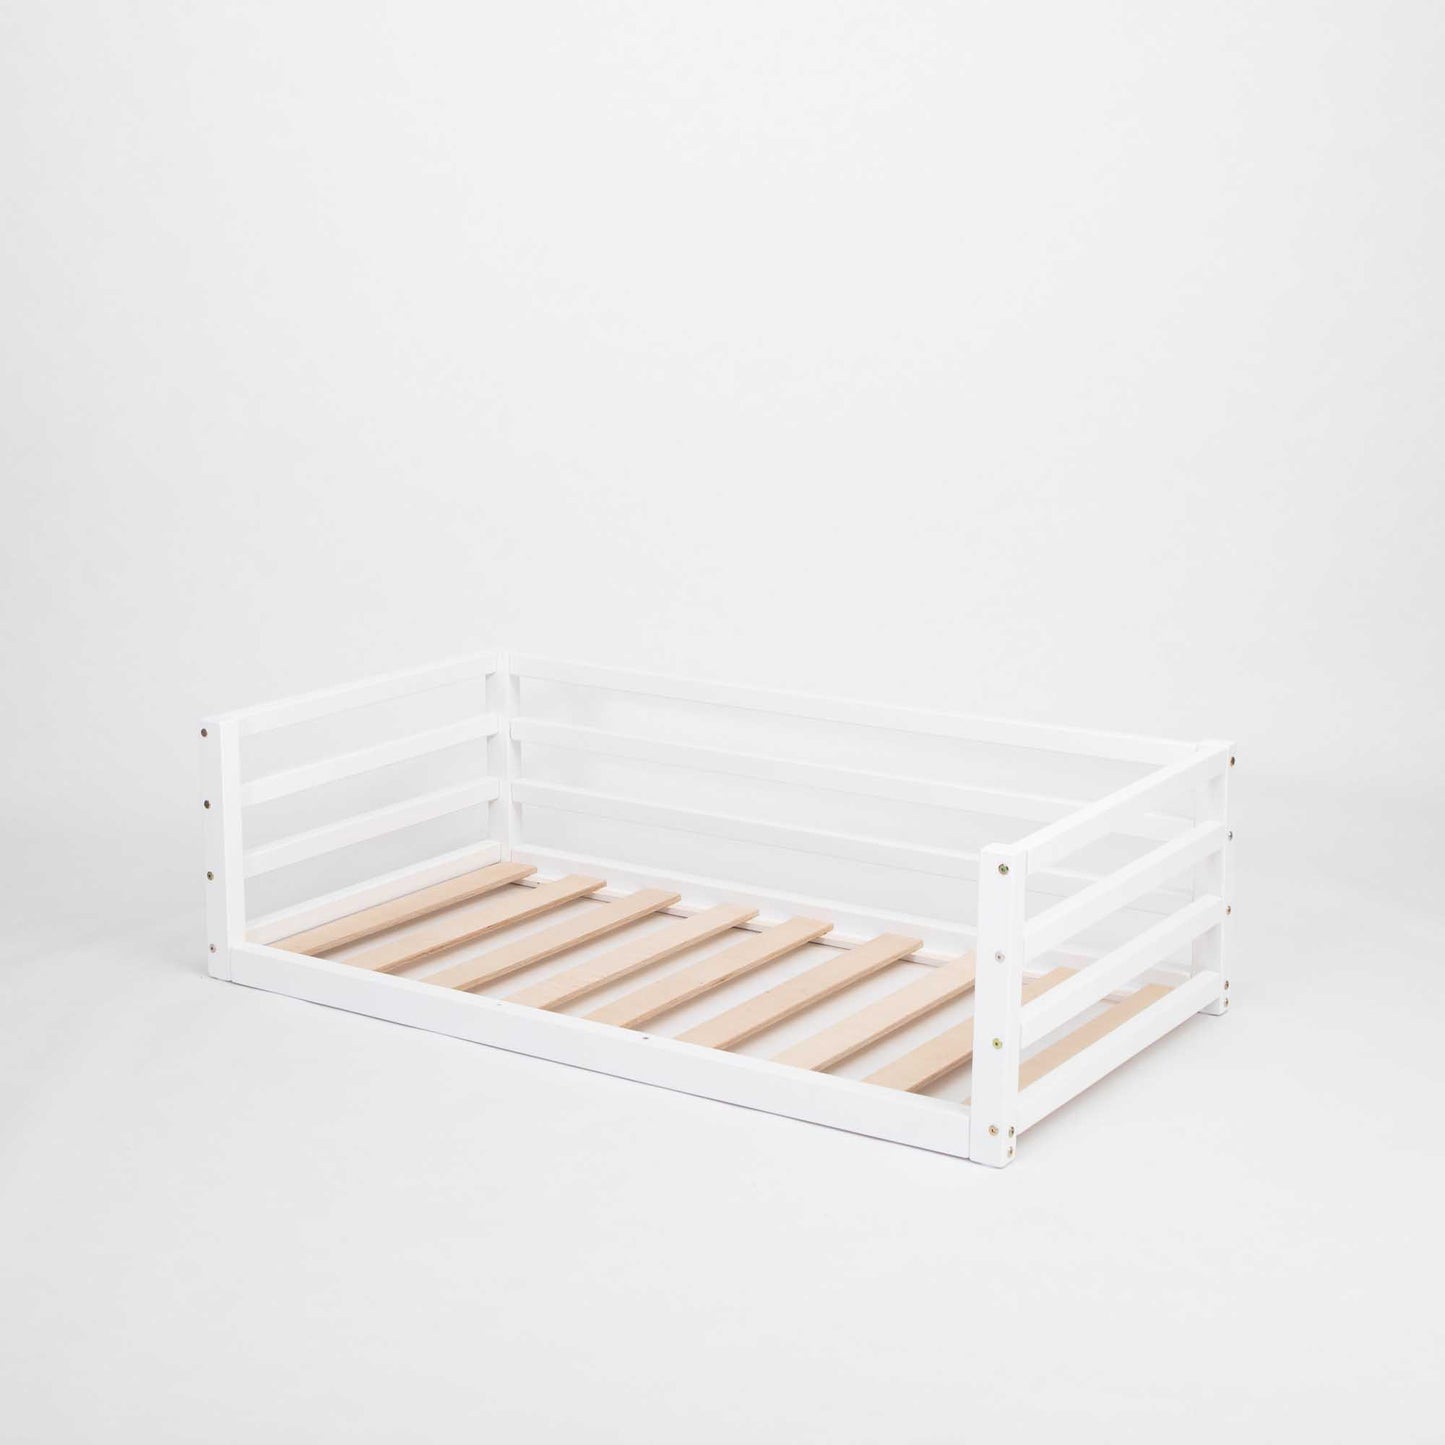 A Children's floor level bed with 3-sided safety rail from Sweet Home From Wood.